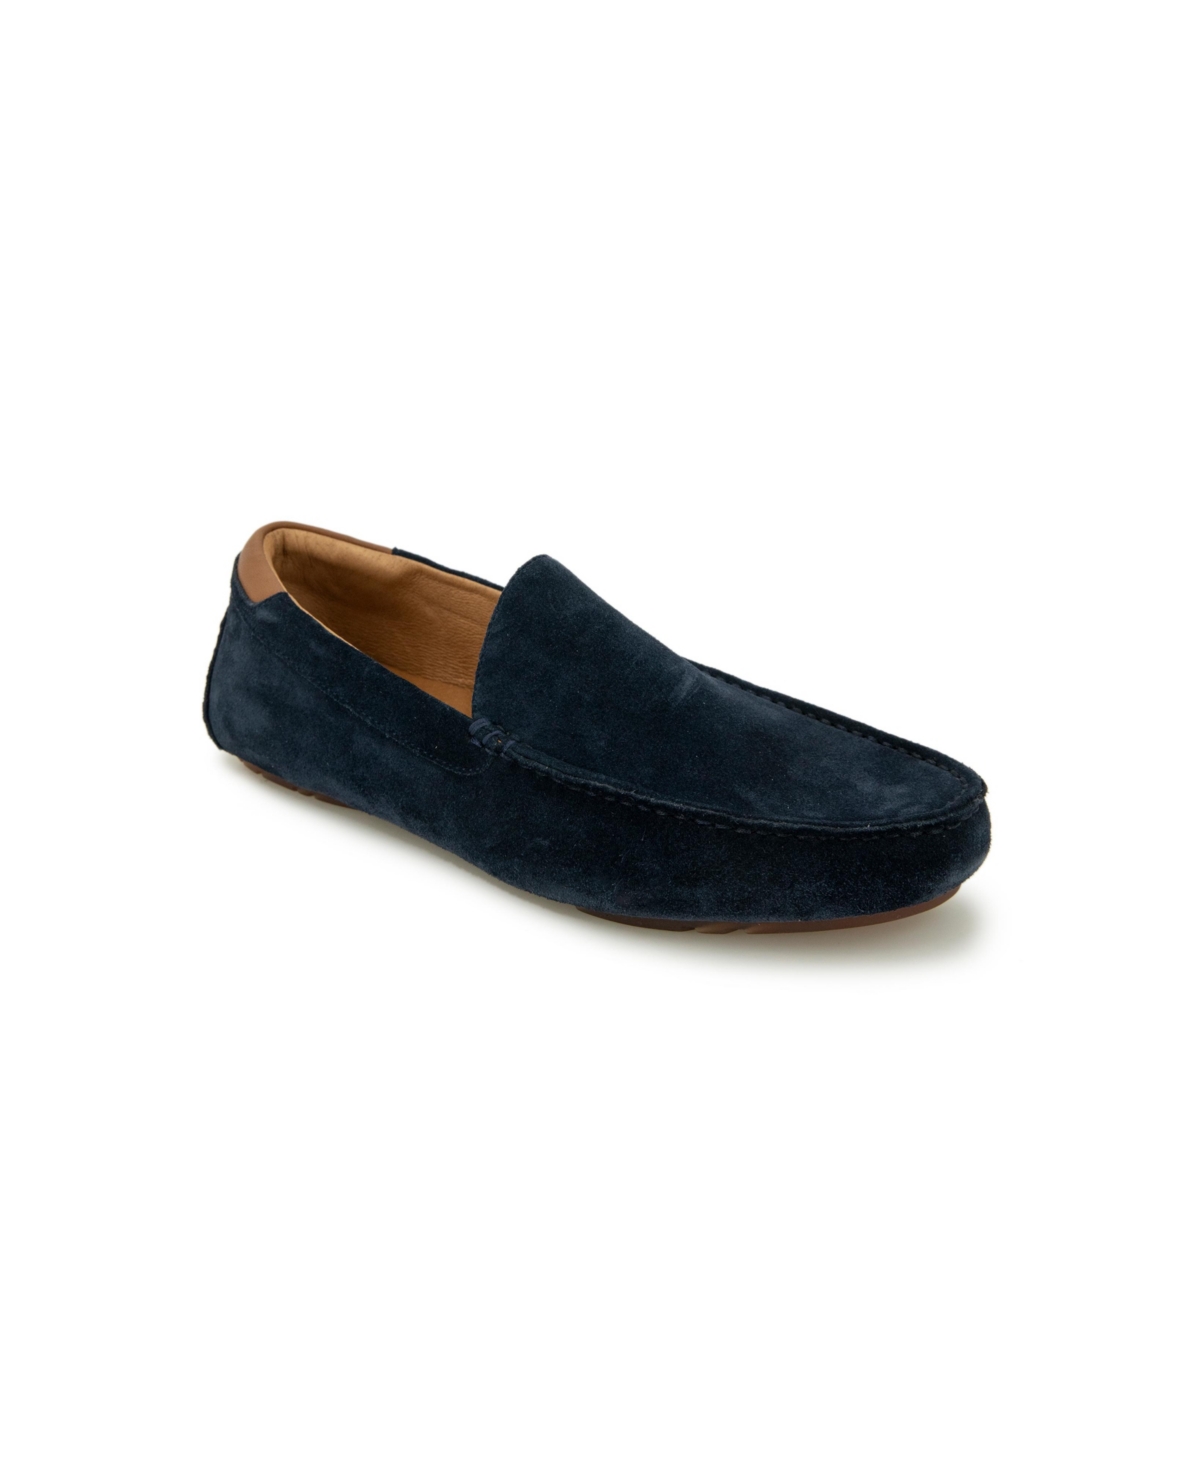 Men's Nyle Lightweight Driver Shoes - Navy